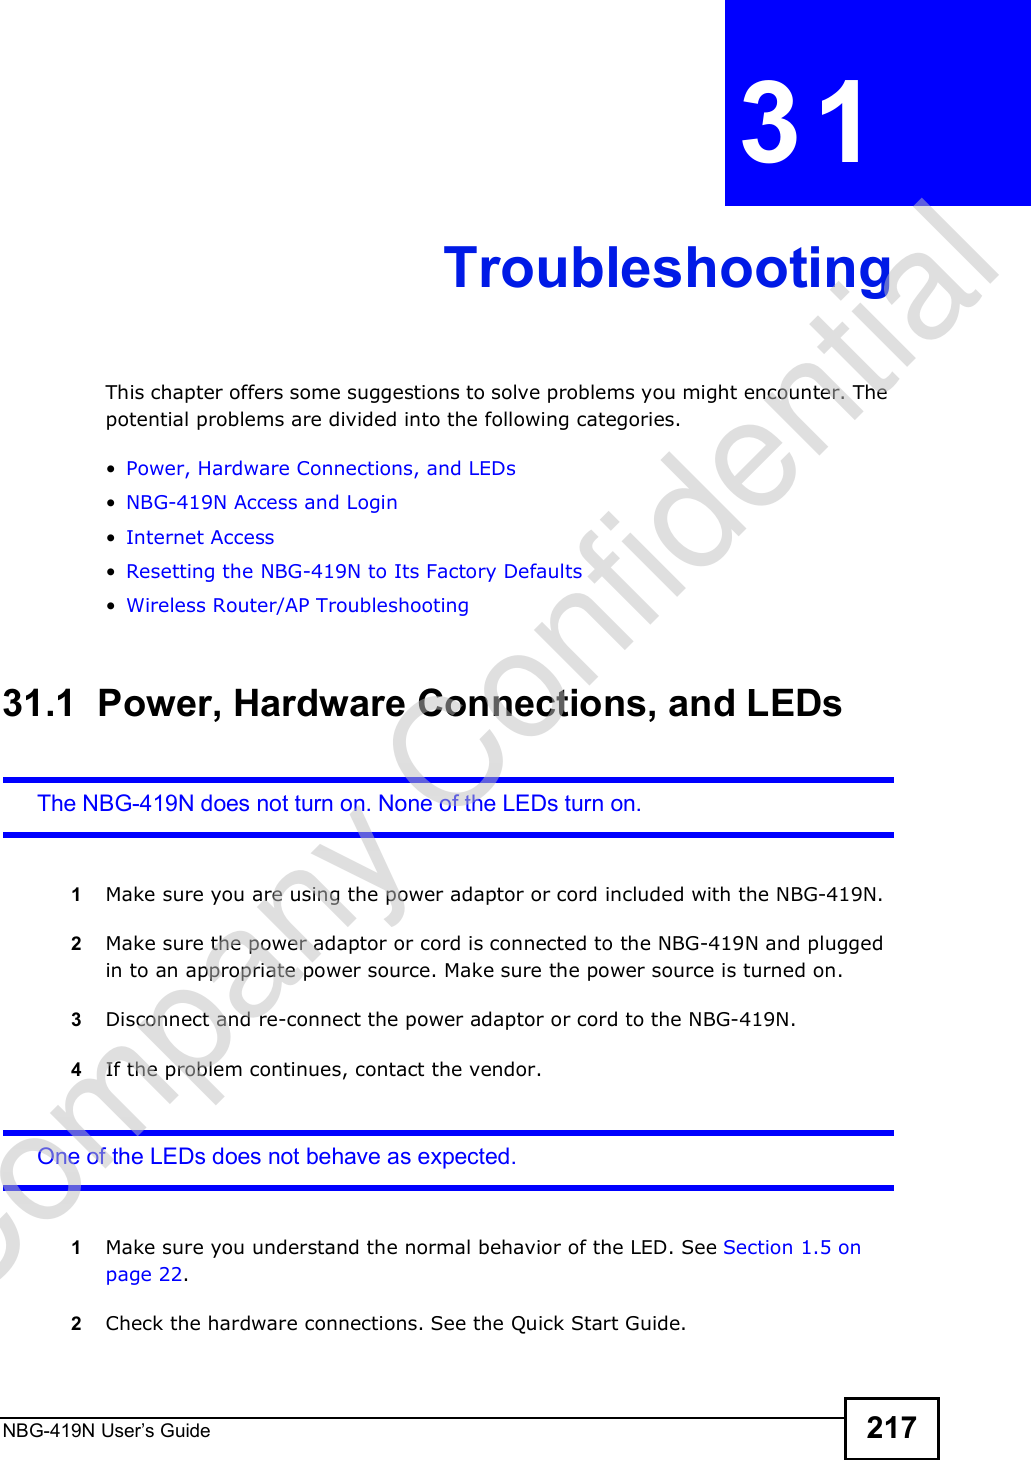 NBG-419N User s Guide 217CHAPTER  31 TroubleshootingThis chapter offers some suggestions to solve problems you might encounter. The potential problems are divided into the following categories.  Power, Hardware Connections, and LEDs NBG-419N Access and Login Internet Access Resetting the NBG-419N to Its Factory Defaults Wireless Router/AP Troubleshooting31.1  Power, Hardware Connections, and LEDsThe NBG-419N does not turn on. None of the LEDs turn on.1Make sure you are using the power adaptor or cord included with the NBG-419N.2Make sure the power adaptor or cord is connected to the NBG-419N and plugged in to an appropriate power source. Make sure the power source is turned on.3Disconnect and re-connect the power adaptor or cord to the NBG-419N.4If the problem continues, contact the vendor.One of the LEDs does not behave as expected.1Make sure you understand the normal behavior of the LED. See Section 1.5 on page 22.2Check the hardware connections. See the Quick Start Guide. Company Confidential